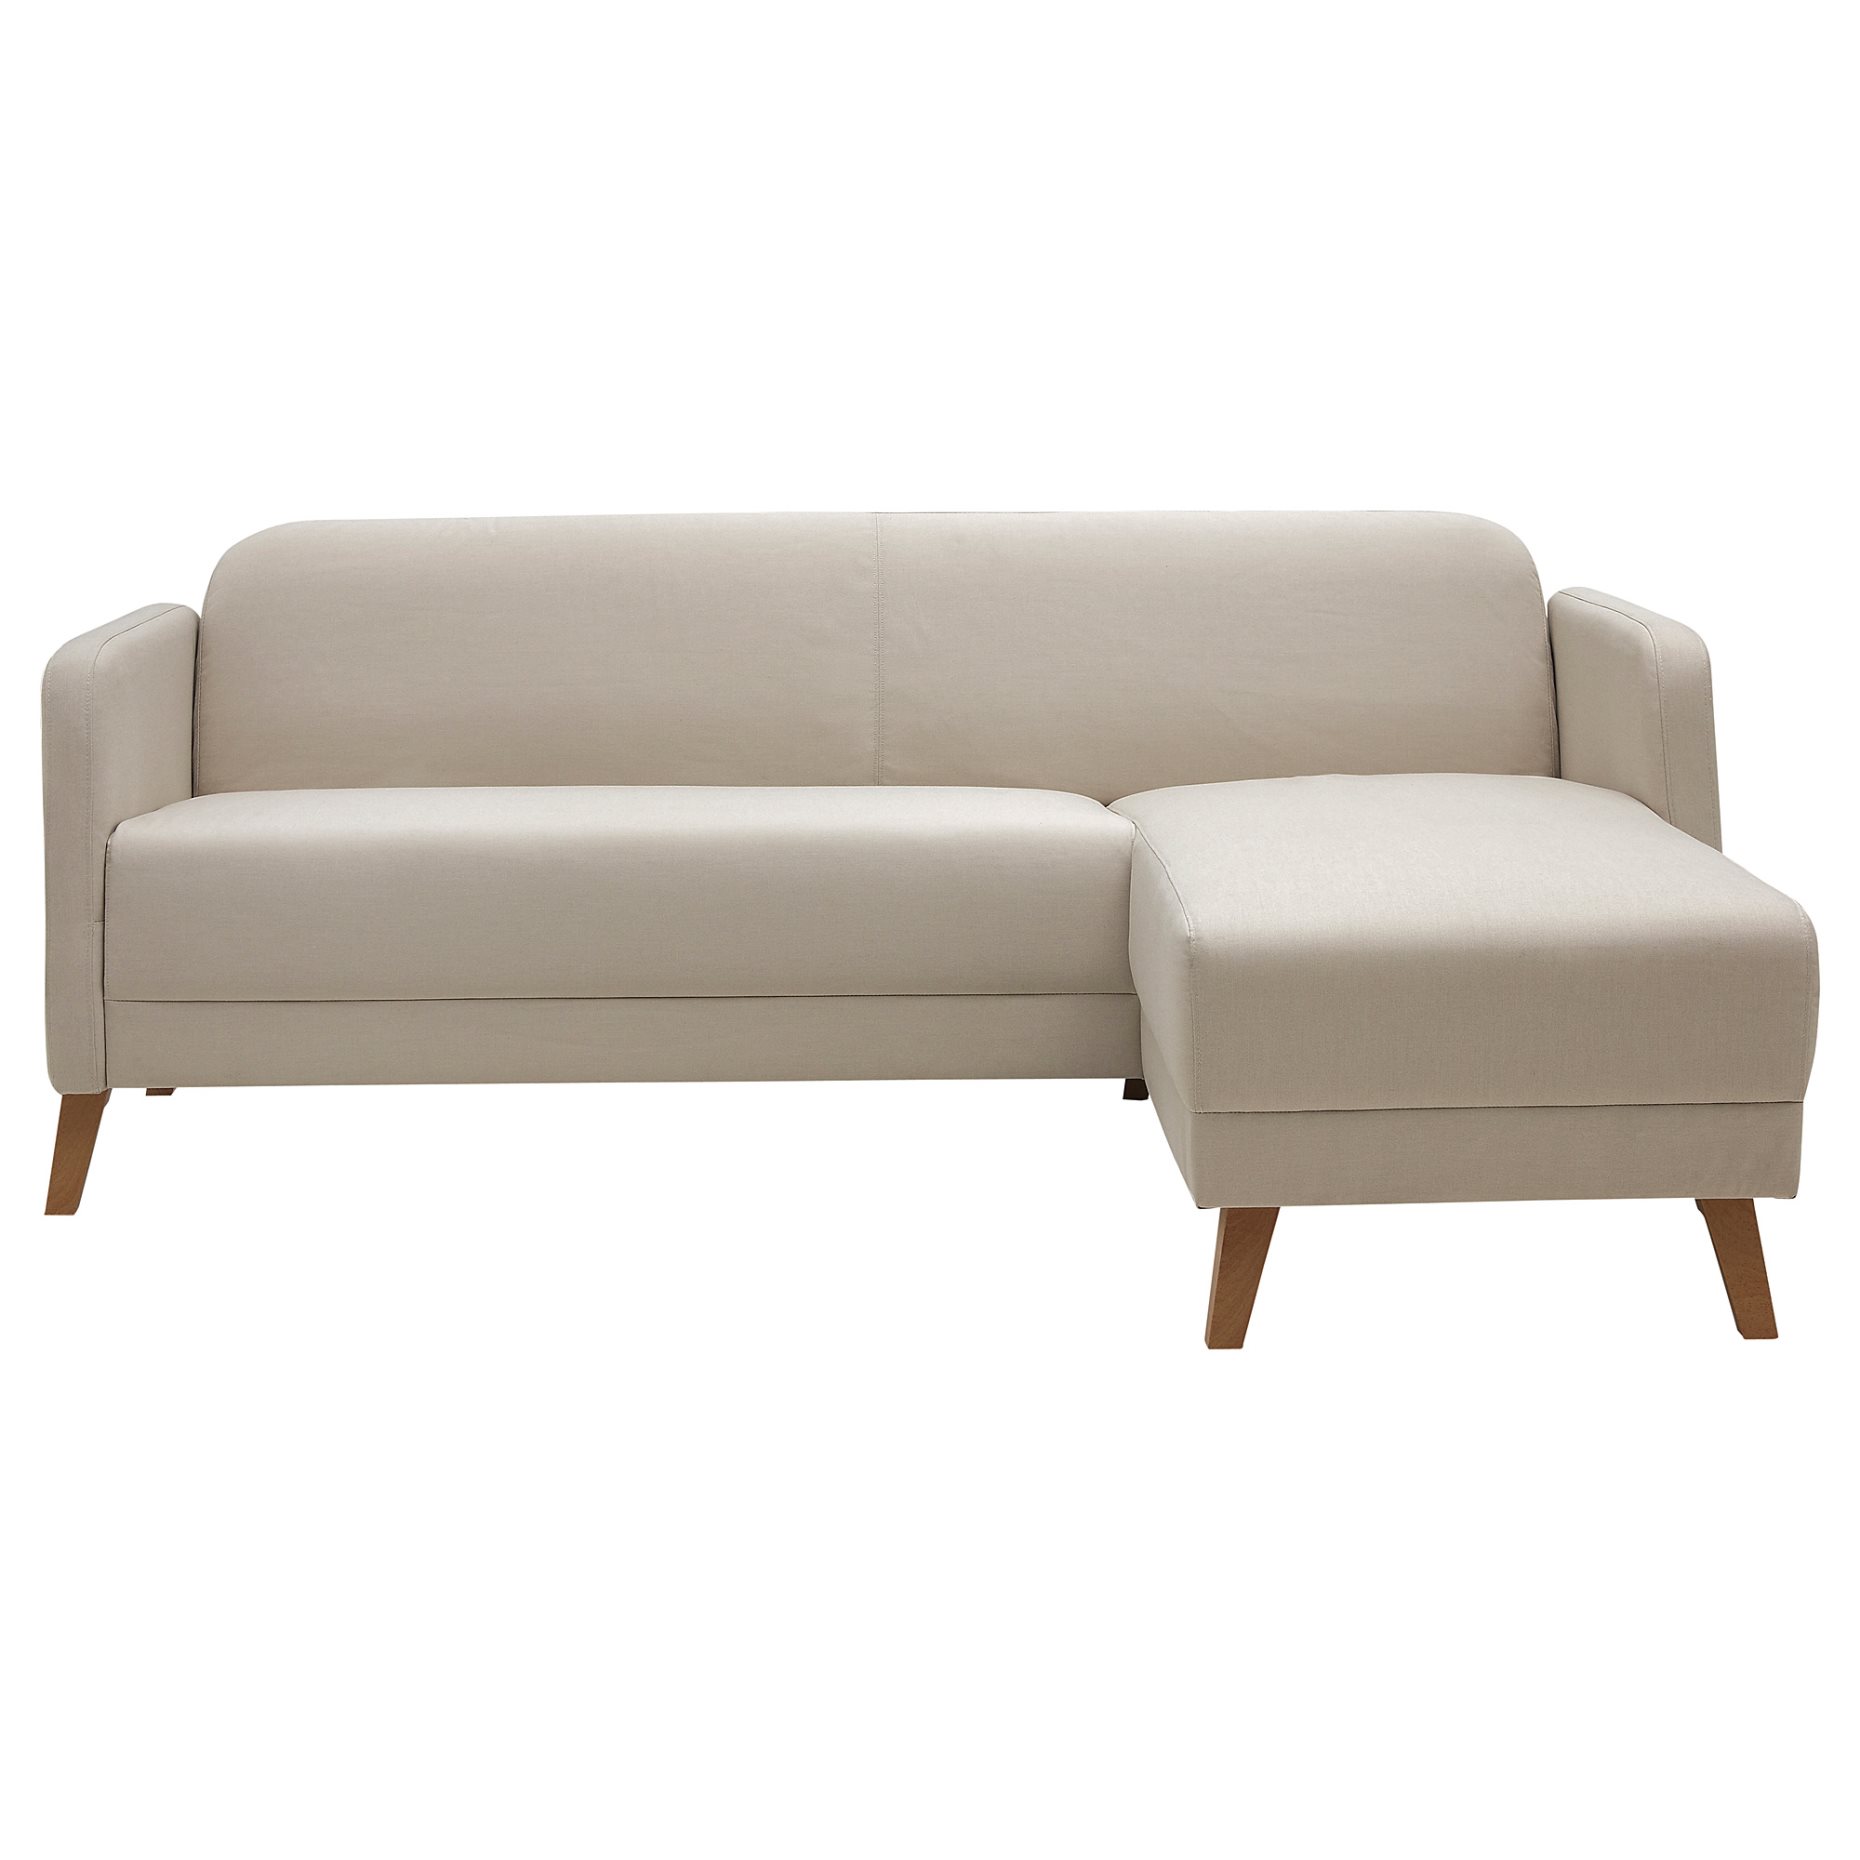 LINANÄS, 3-seat sofa with chaise longue, 305.122.35